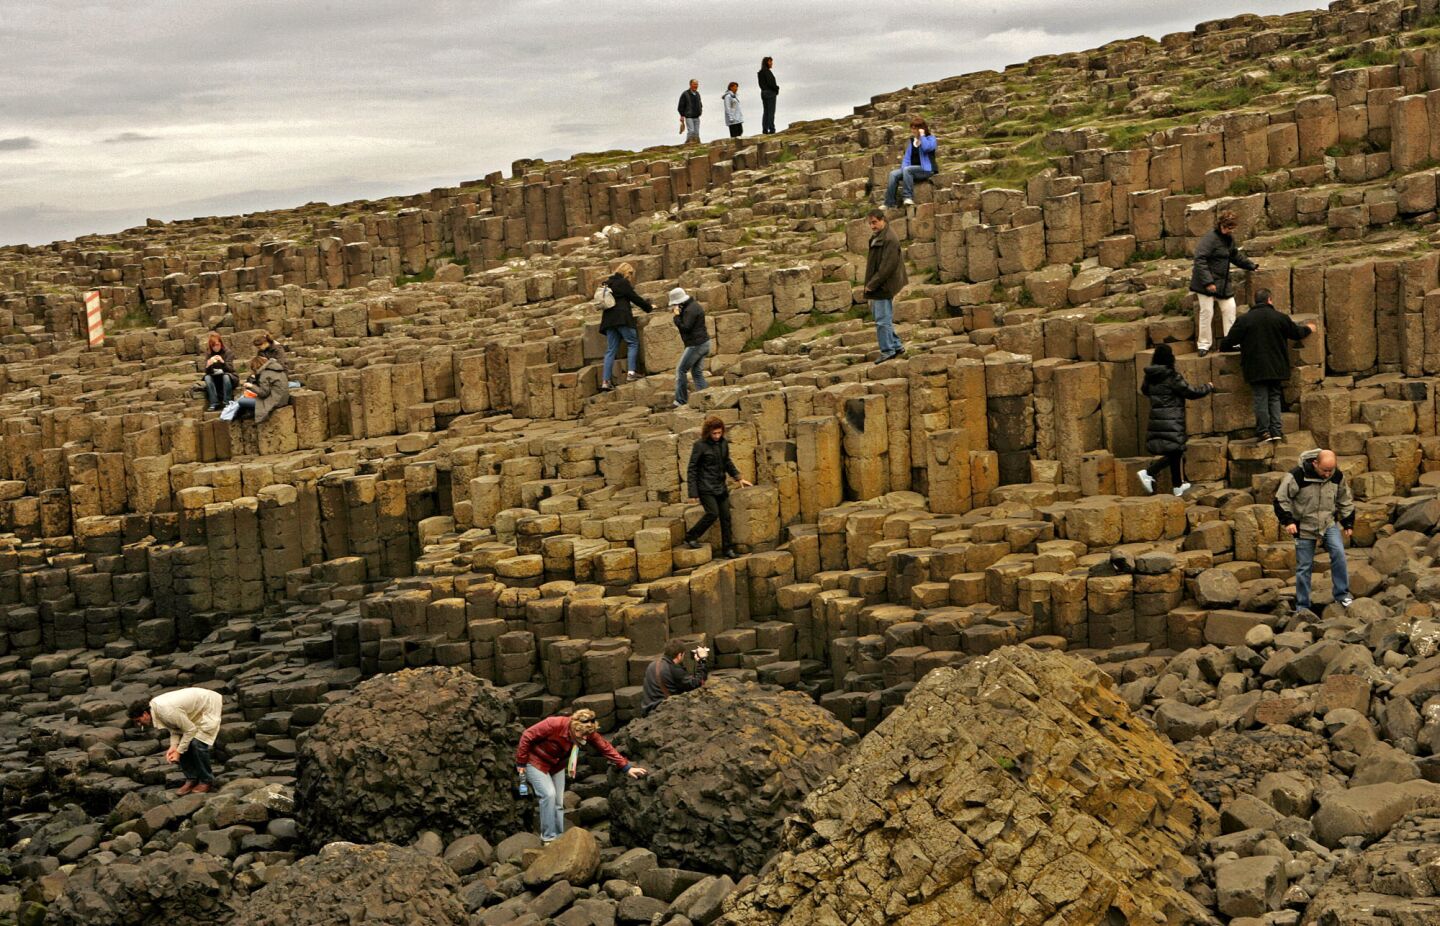 The Giant's Causeway, Northern Ireland